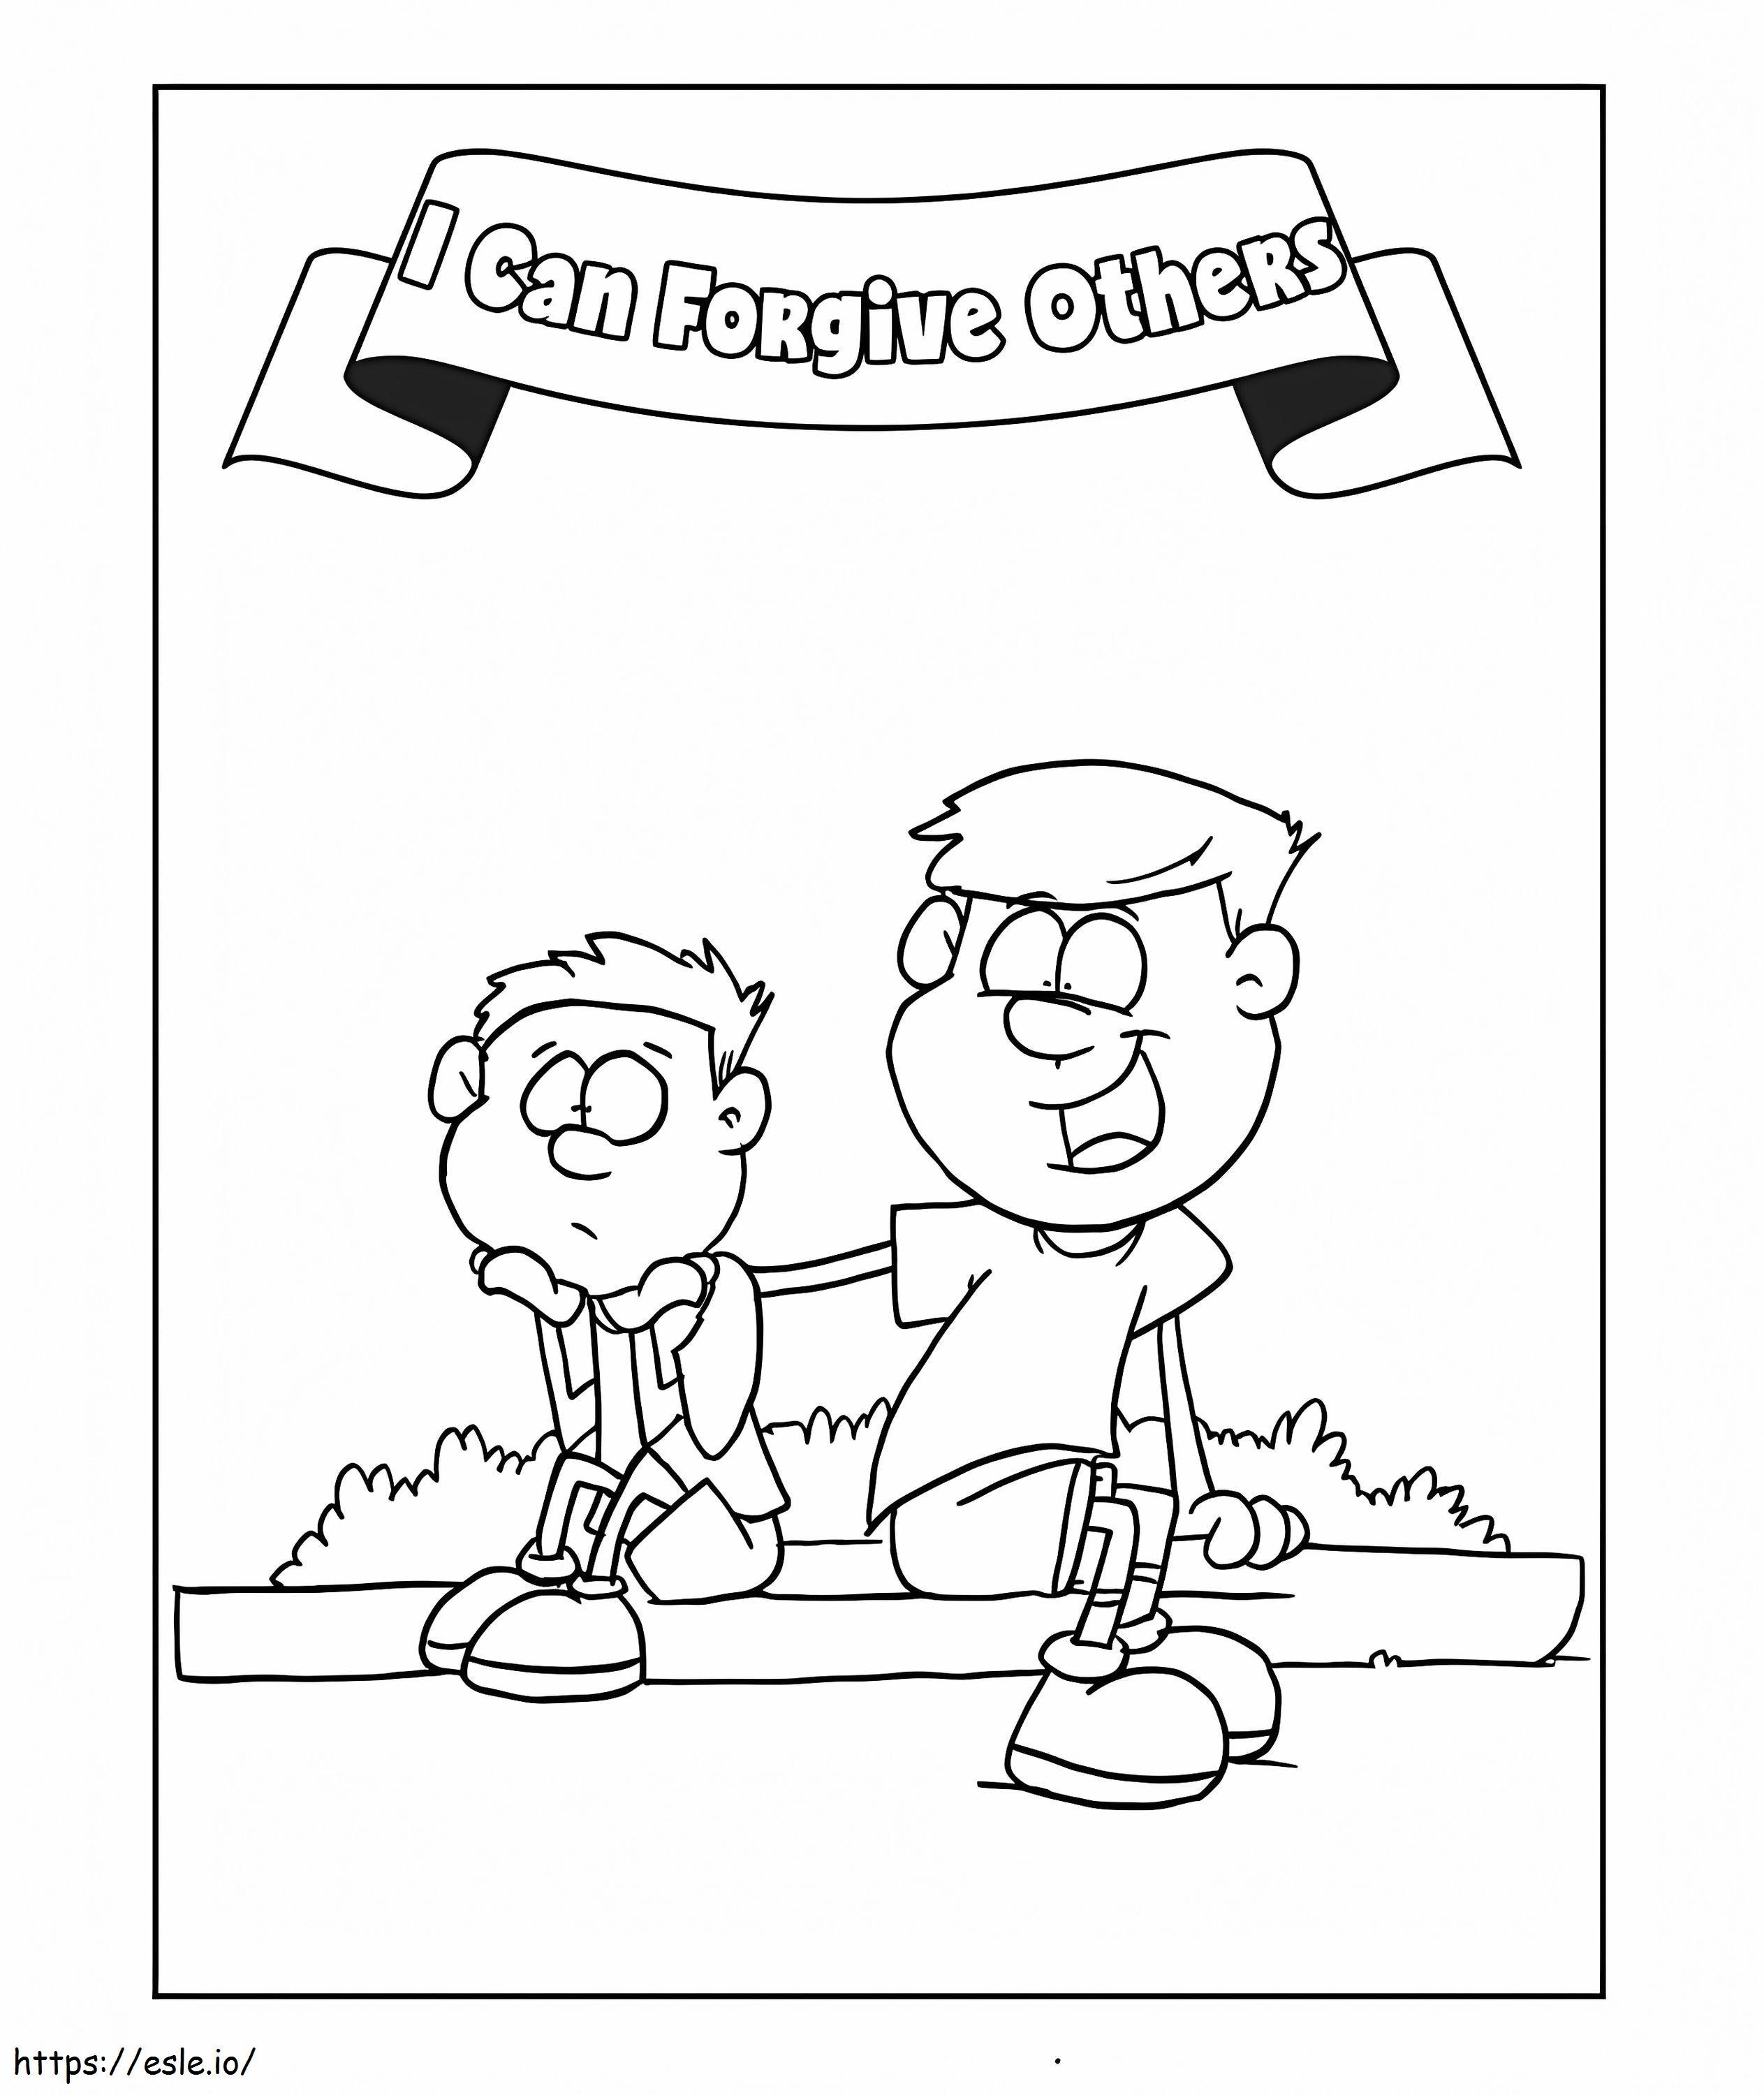 Print I Can Forgive Others coloring page